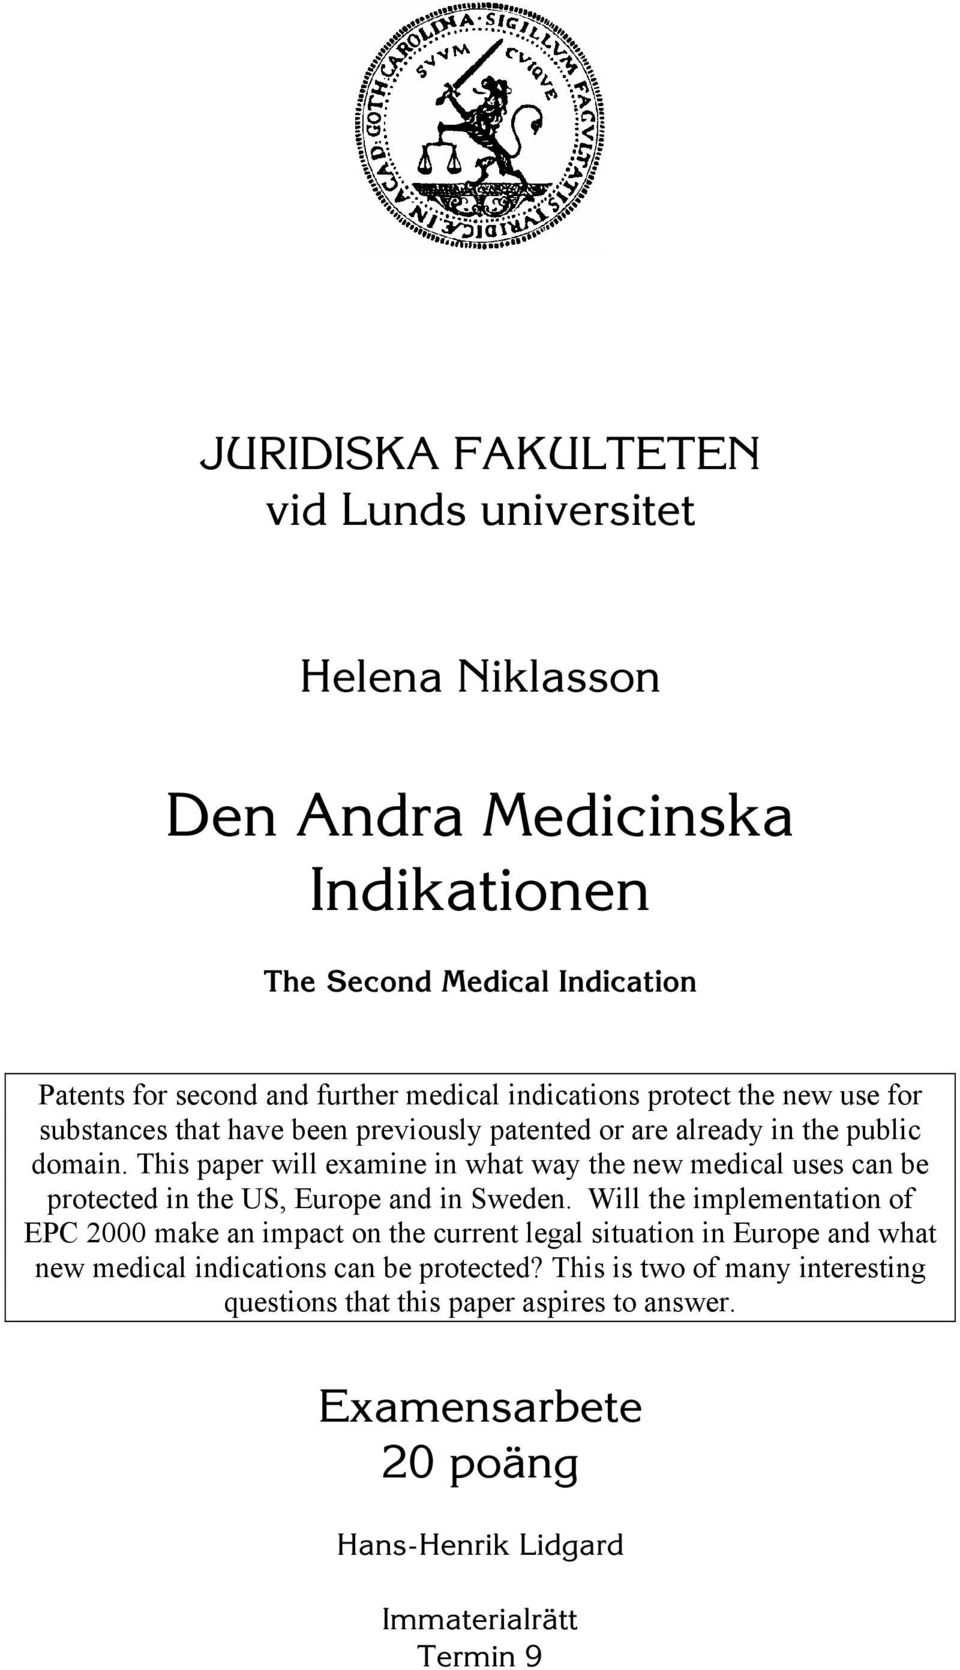 This paper will examine in what way the new medical uses can be protected in the US, Europe and in Sweden.